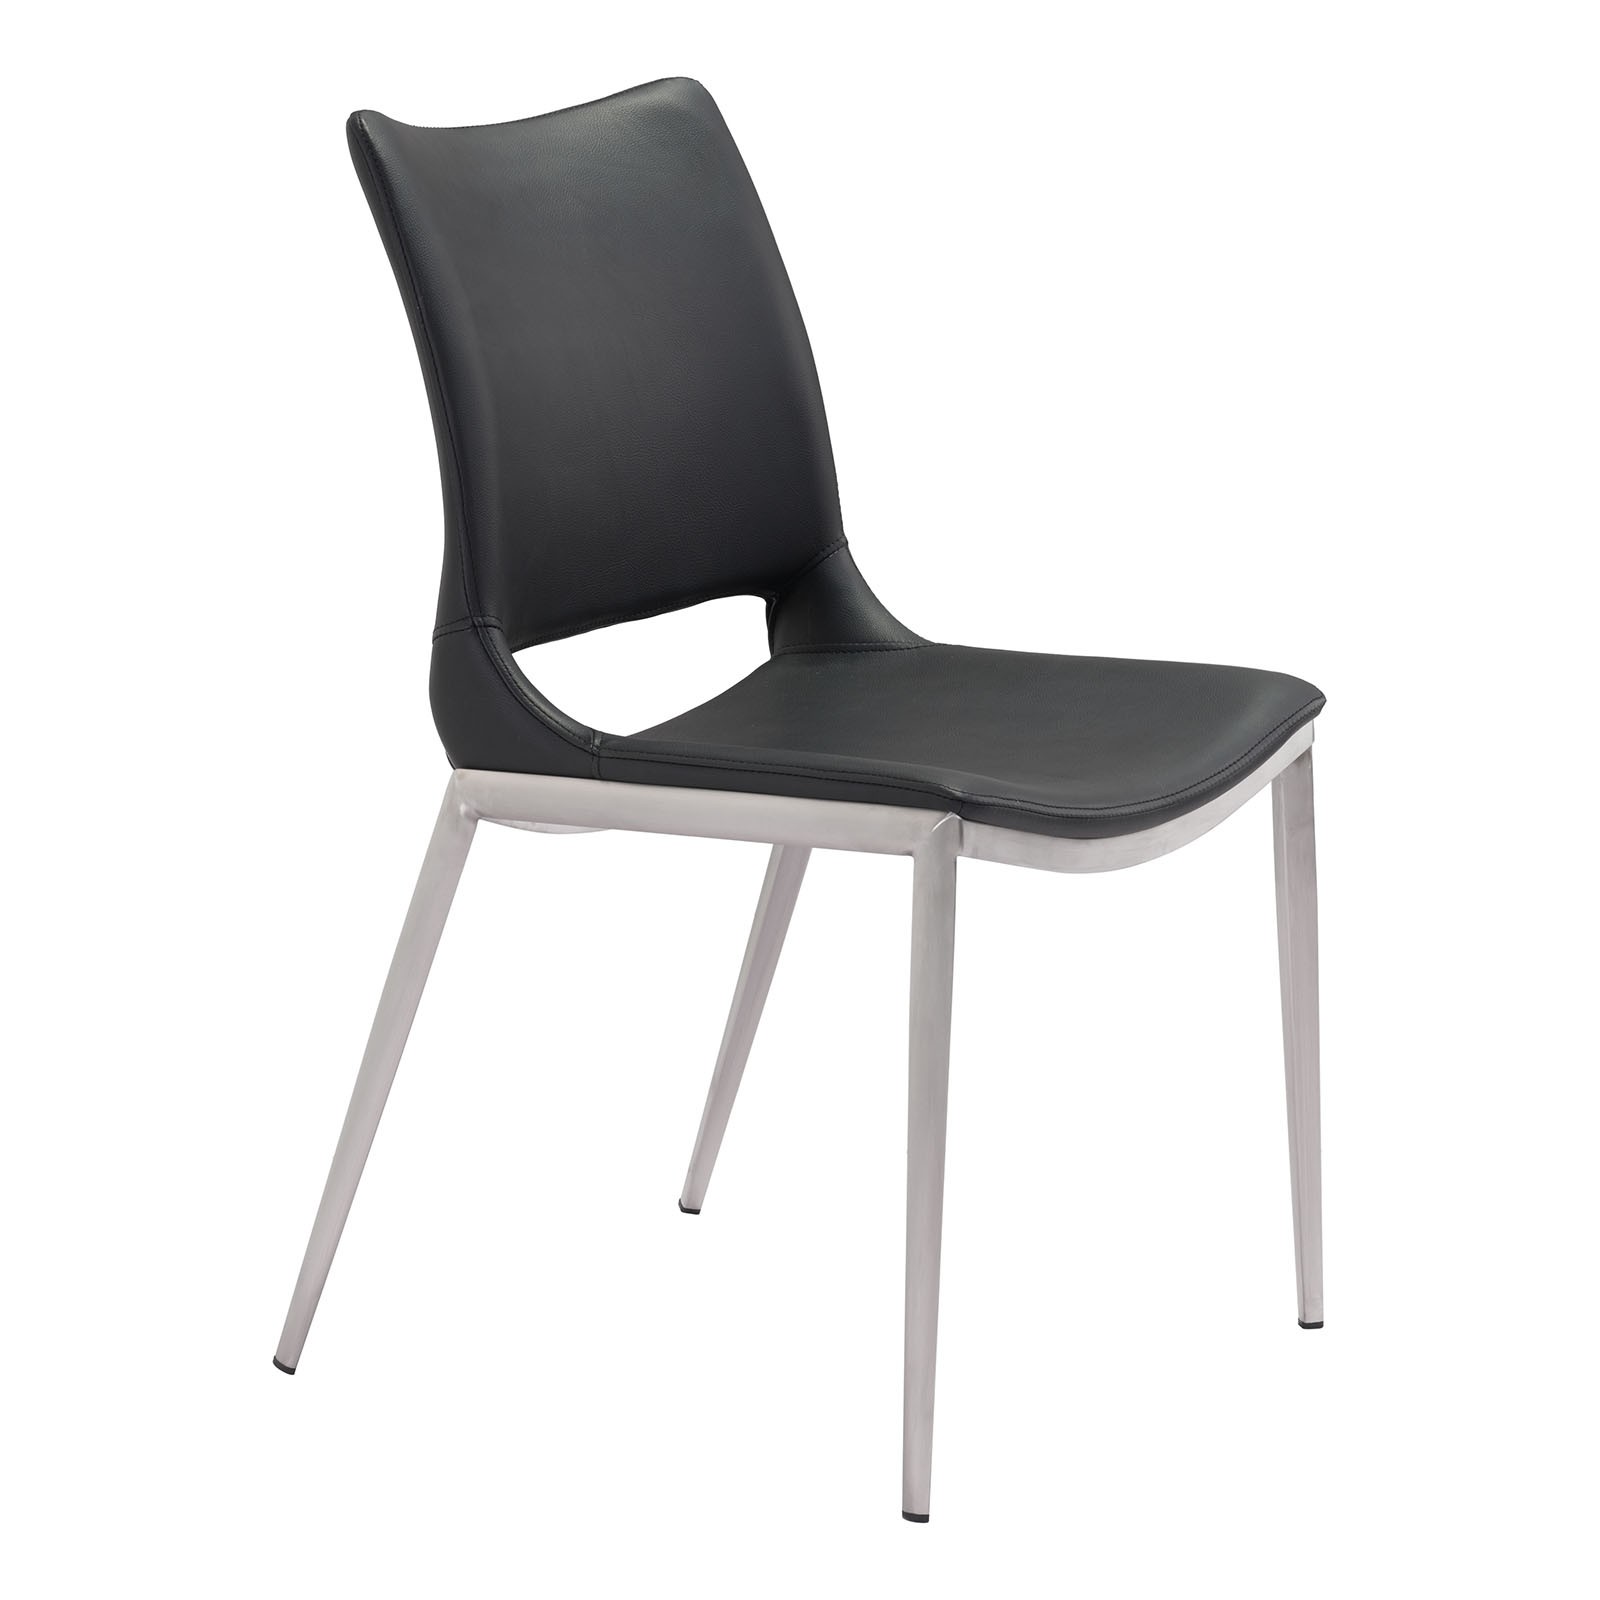 Ace Dining Chair Set of 2